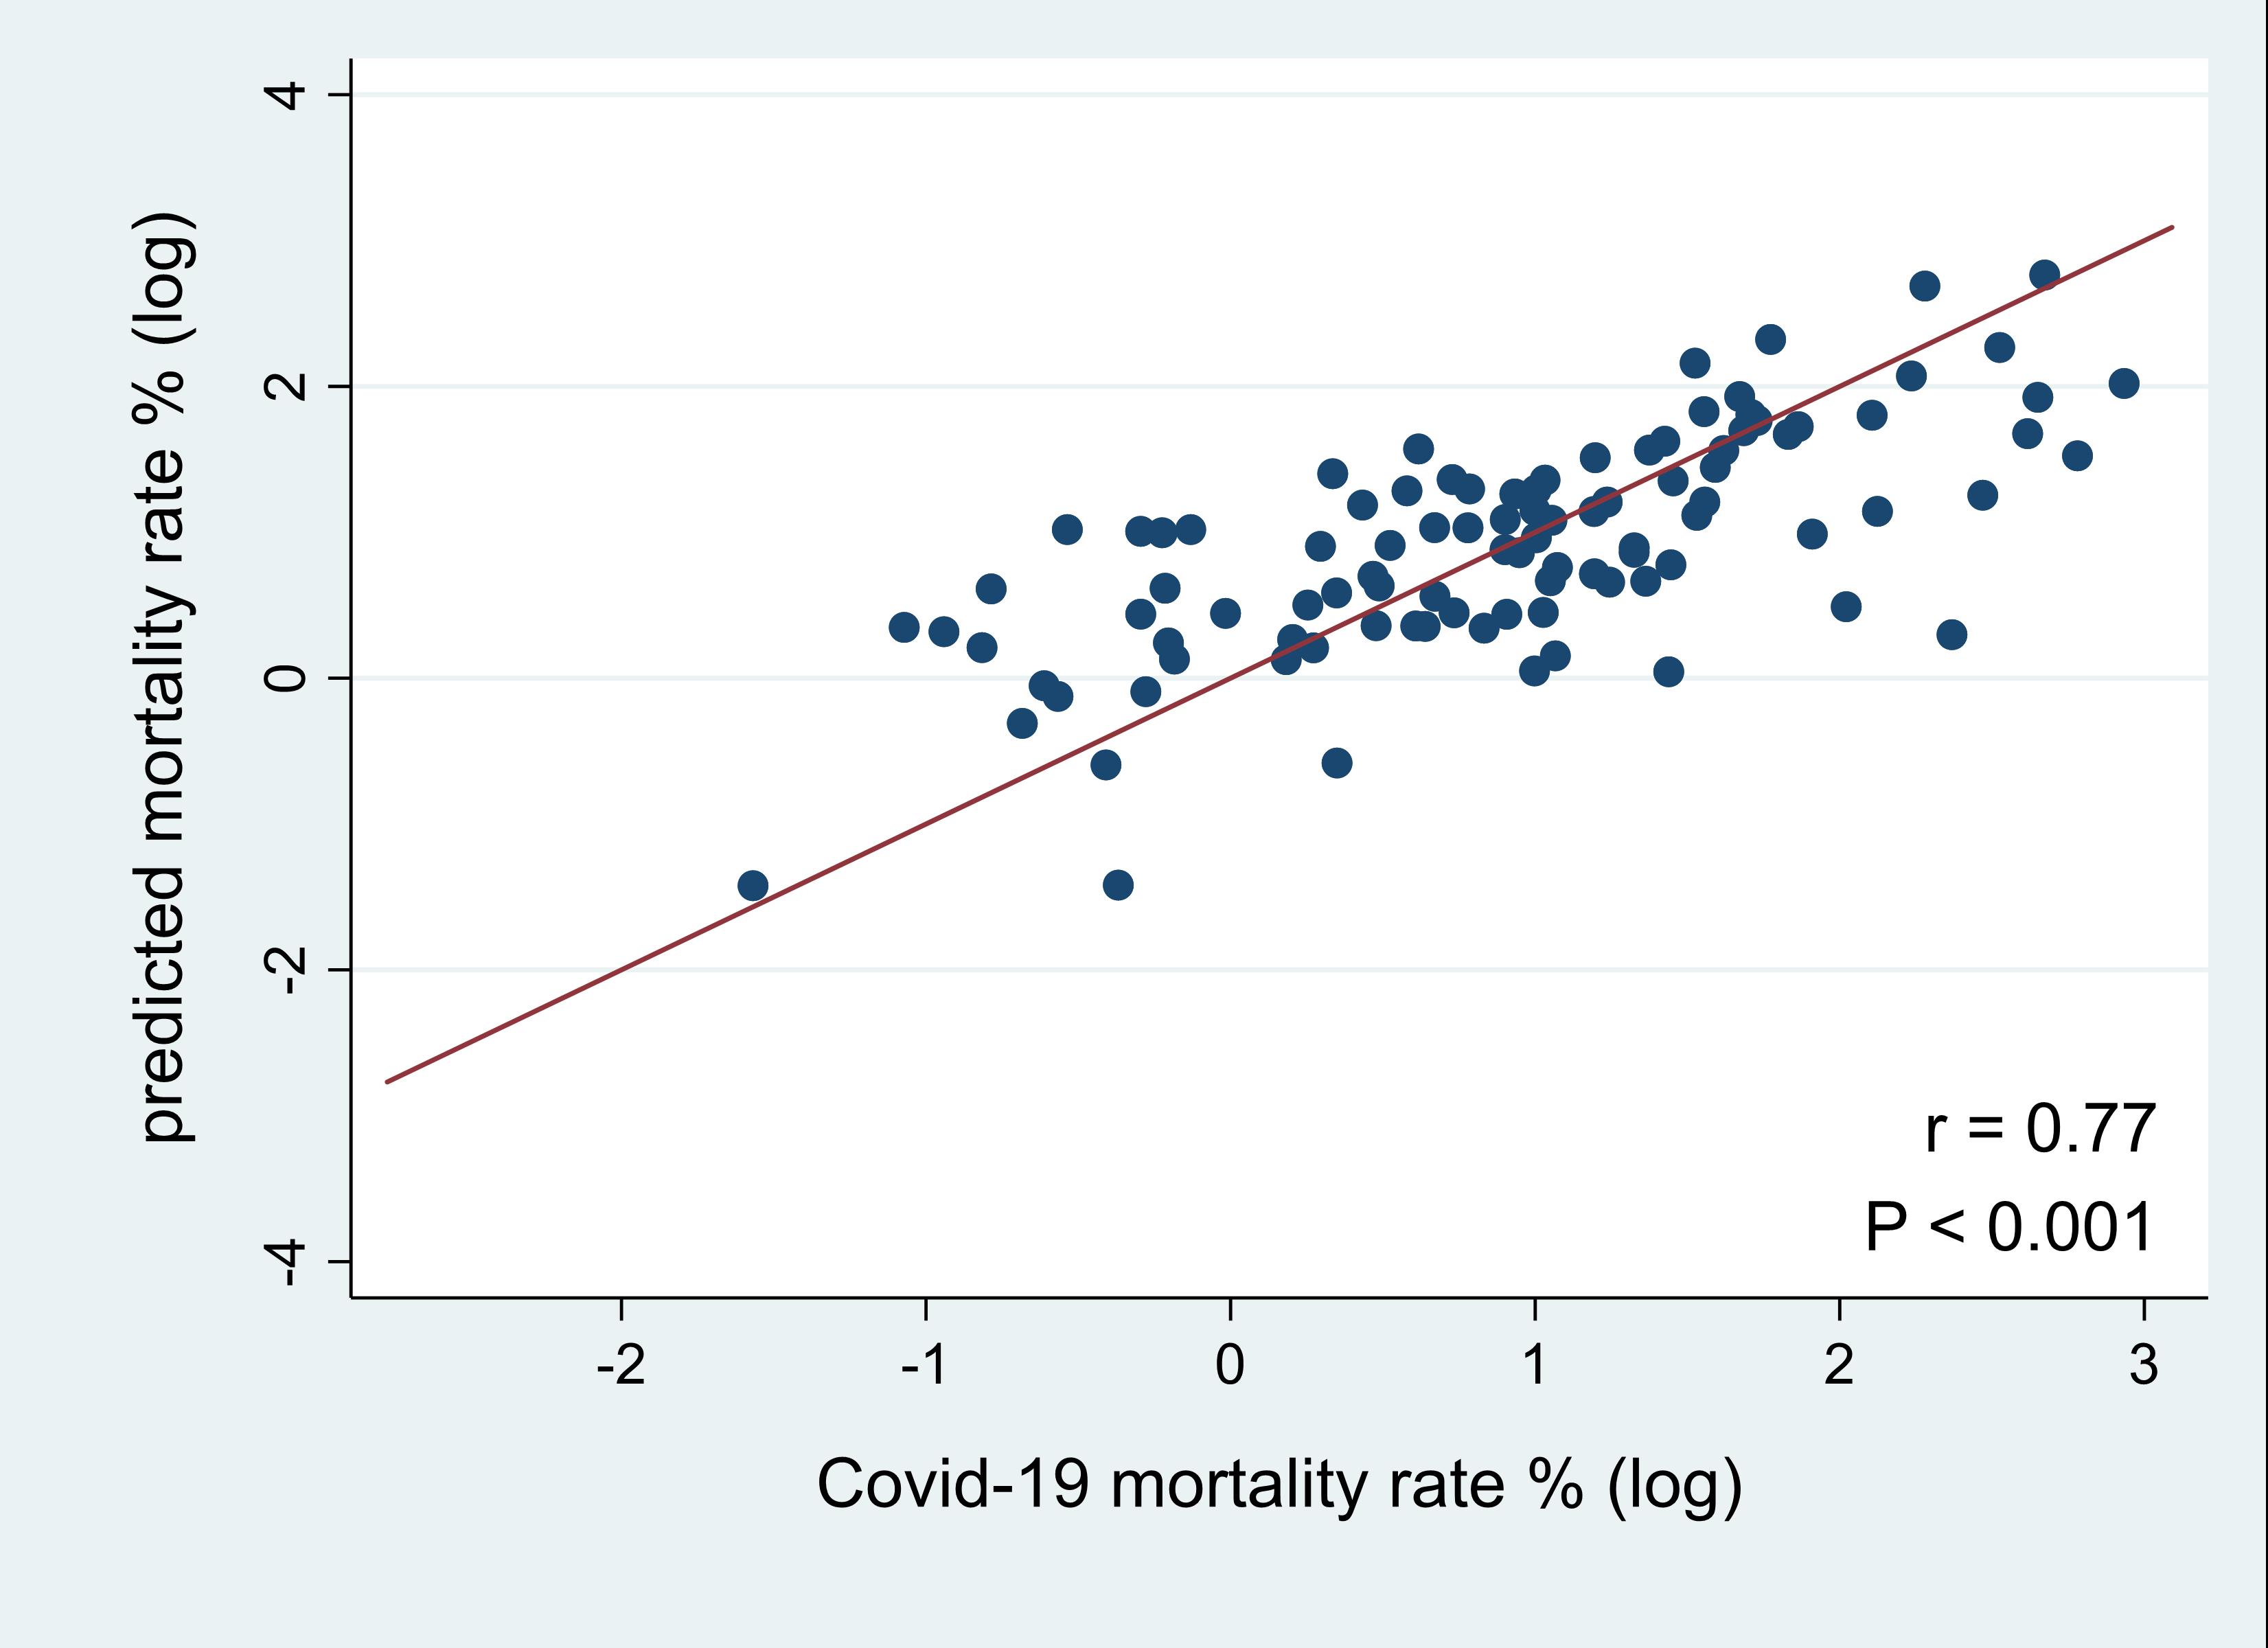 Correlation between observed and predicted Covid-19 mortality rates